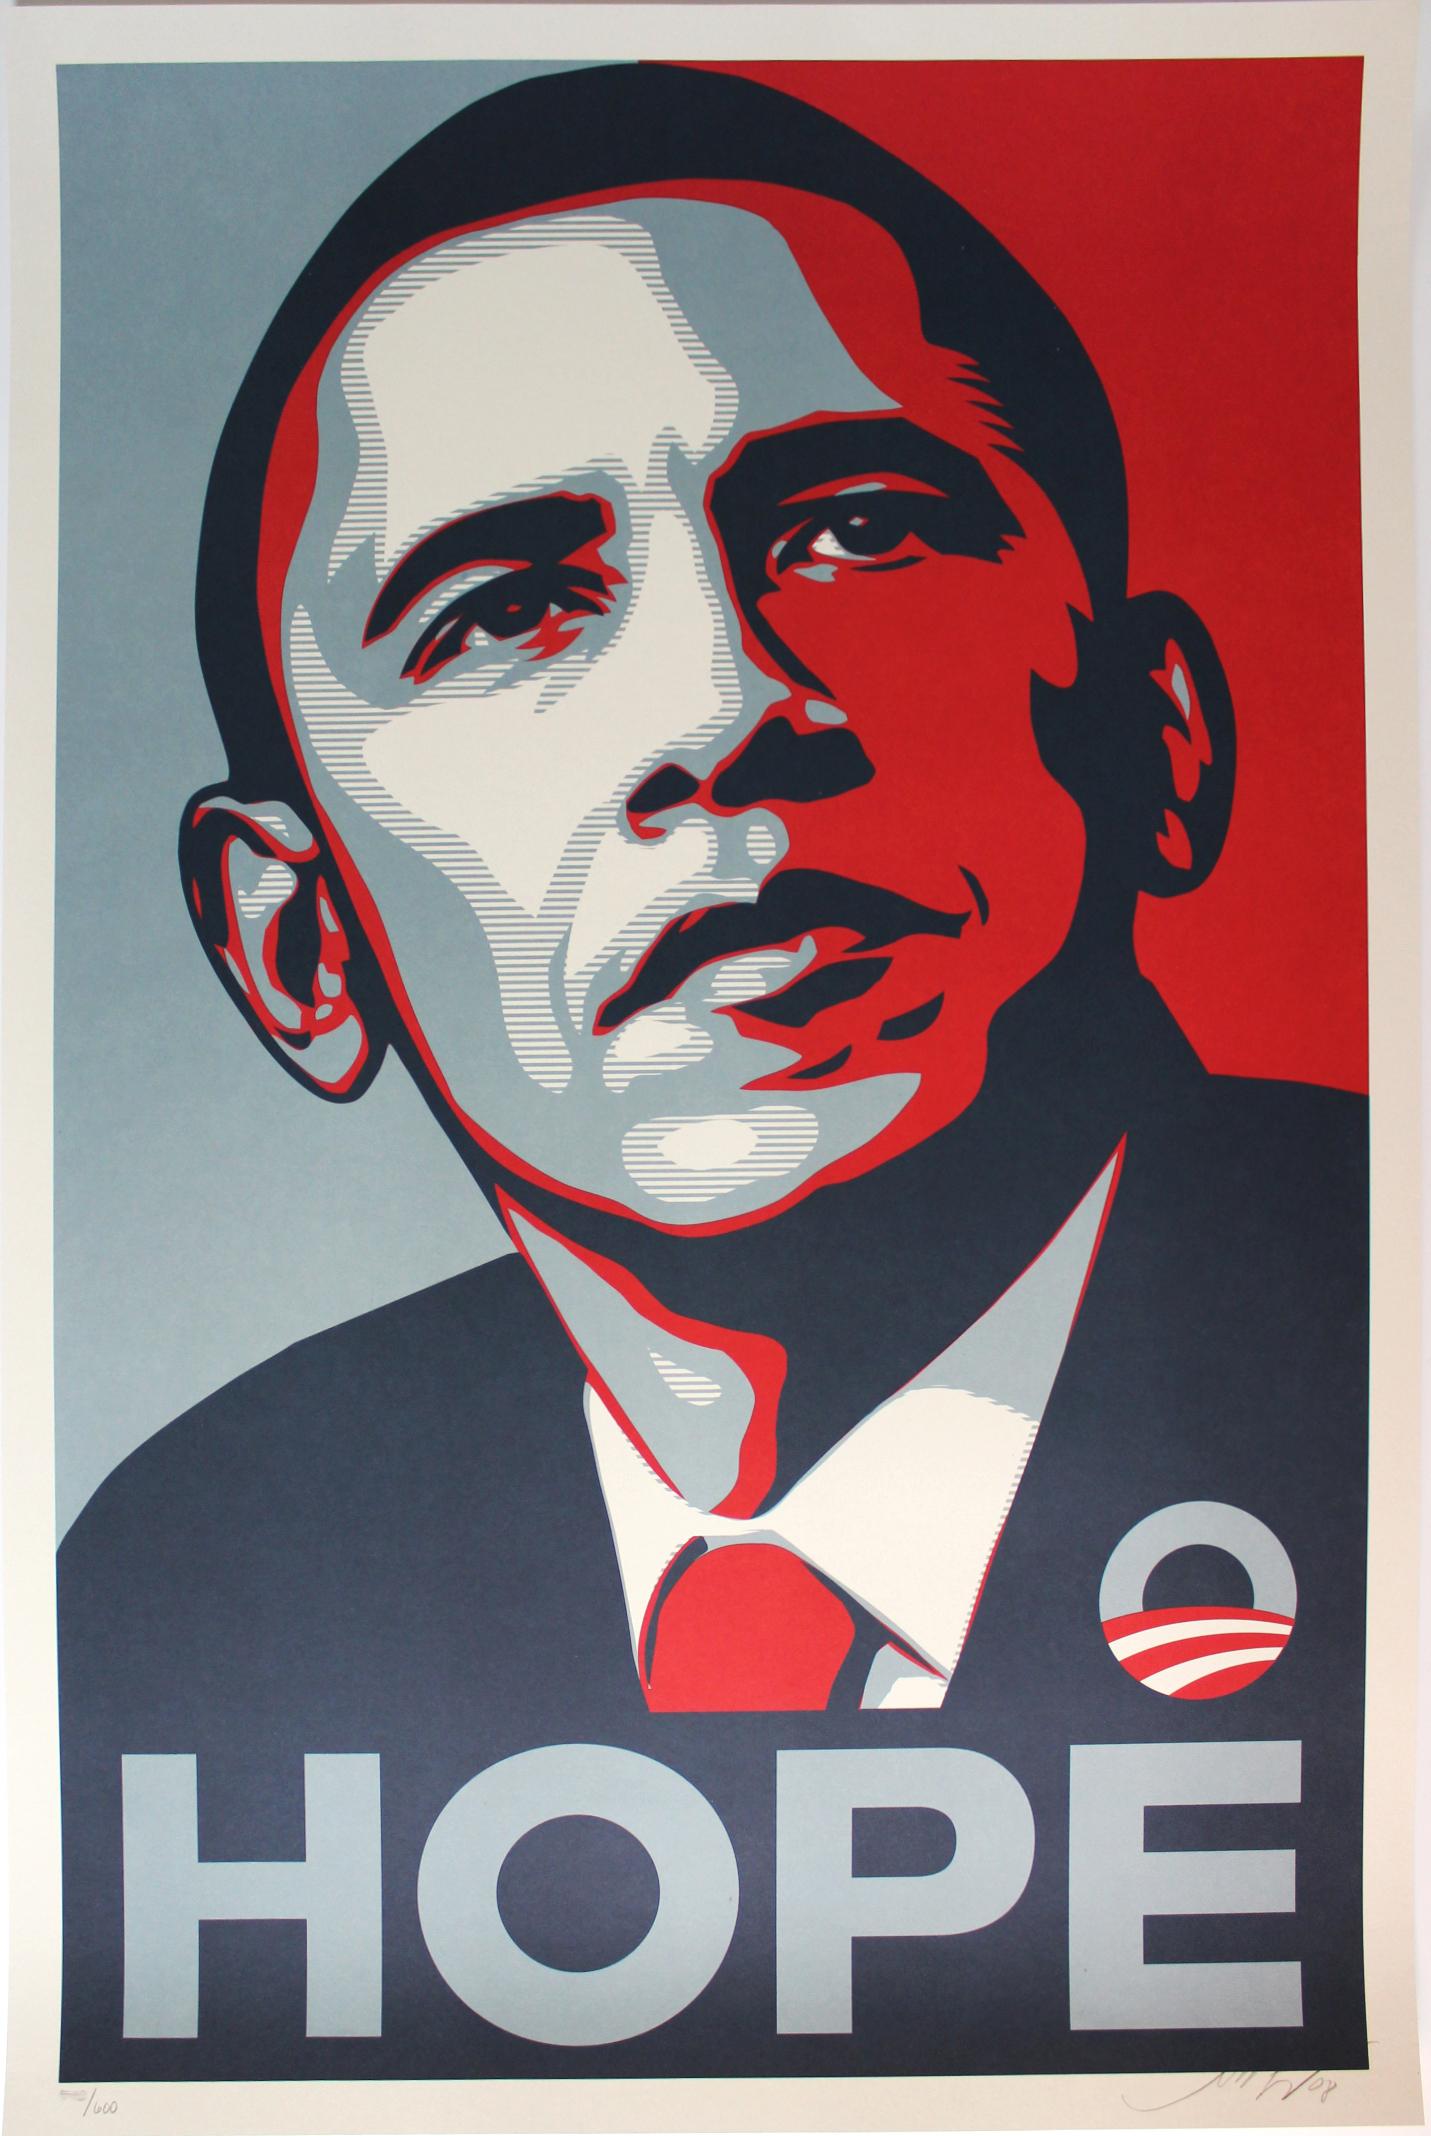 HOPE (Obama) signed and numbered  - Print by Shepard Fairey